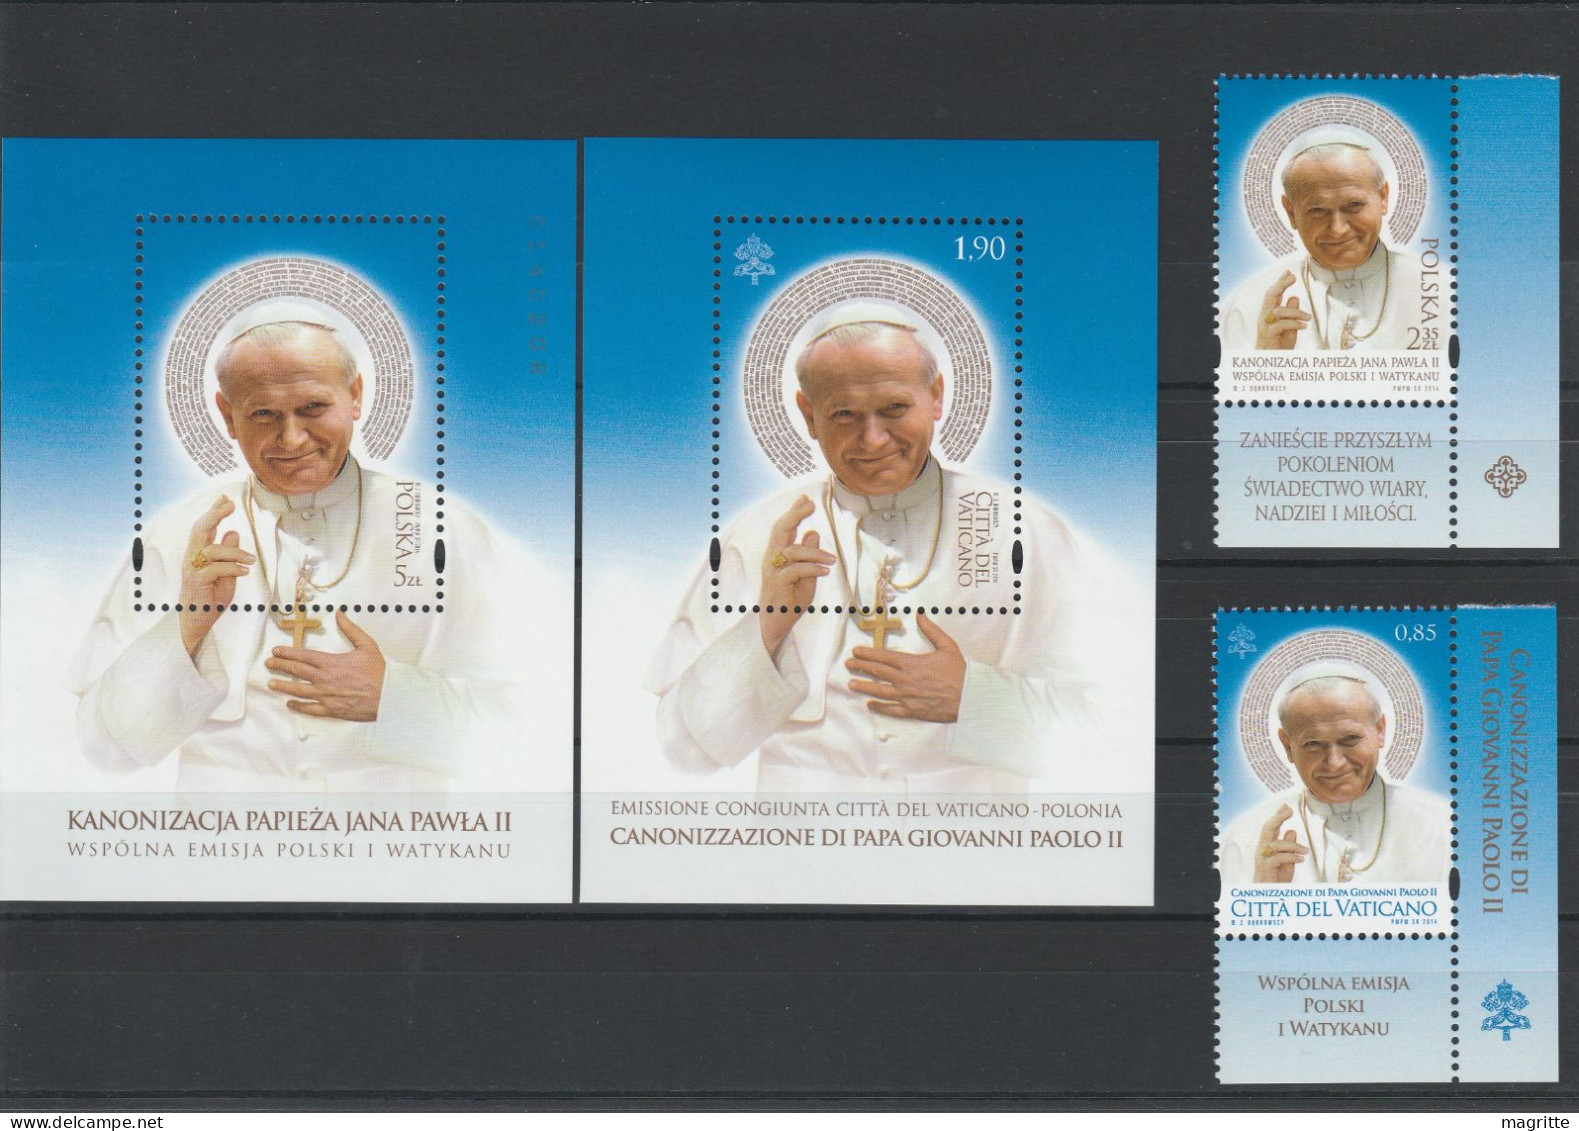 Pologne Vatican 2014 Emission Commune Canonisation Pape Jean Paul II Pope Poland Joint Issue John Paul II - Emisiones Comunes